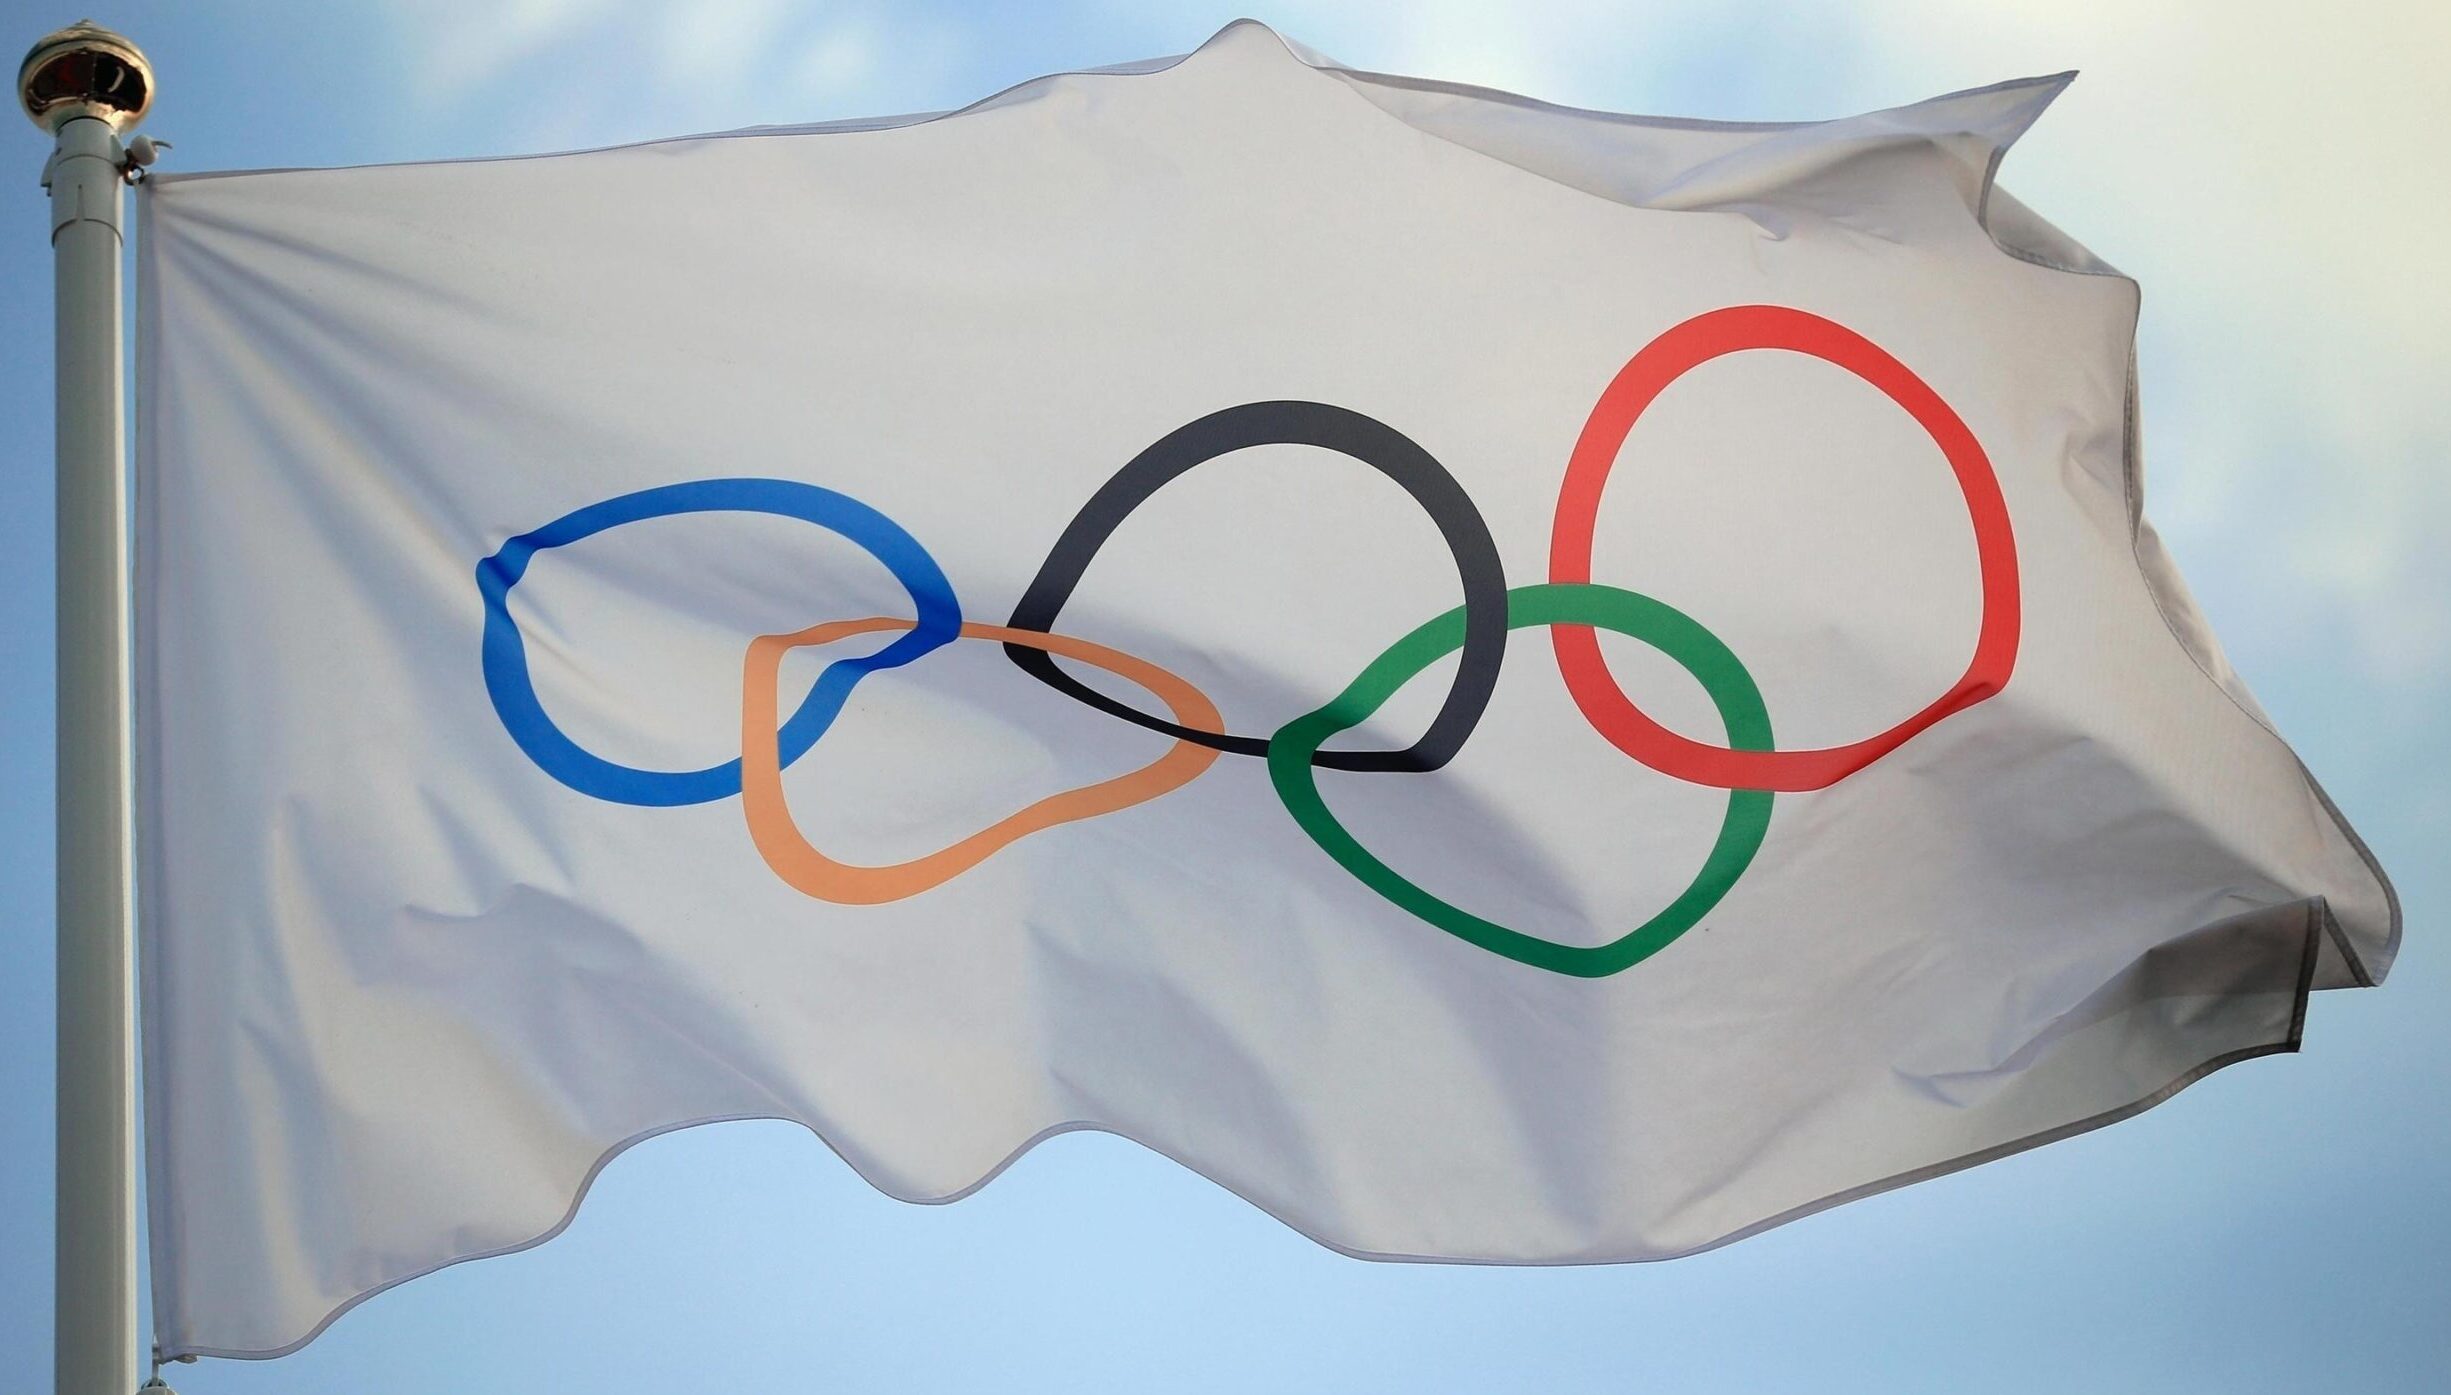  IOC EB urges all international federations to avoid events in Russia or Belarus